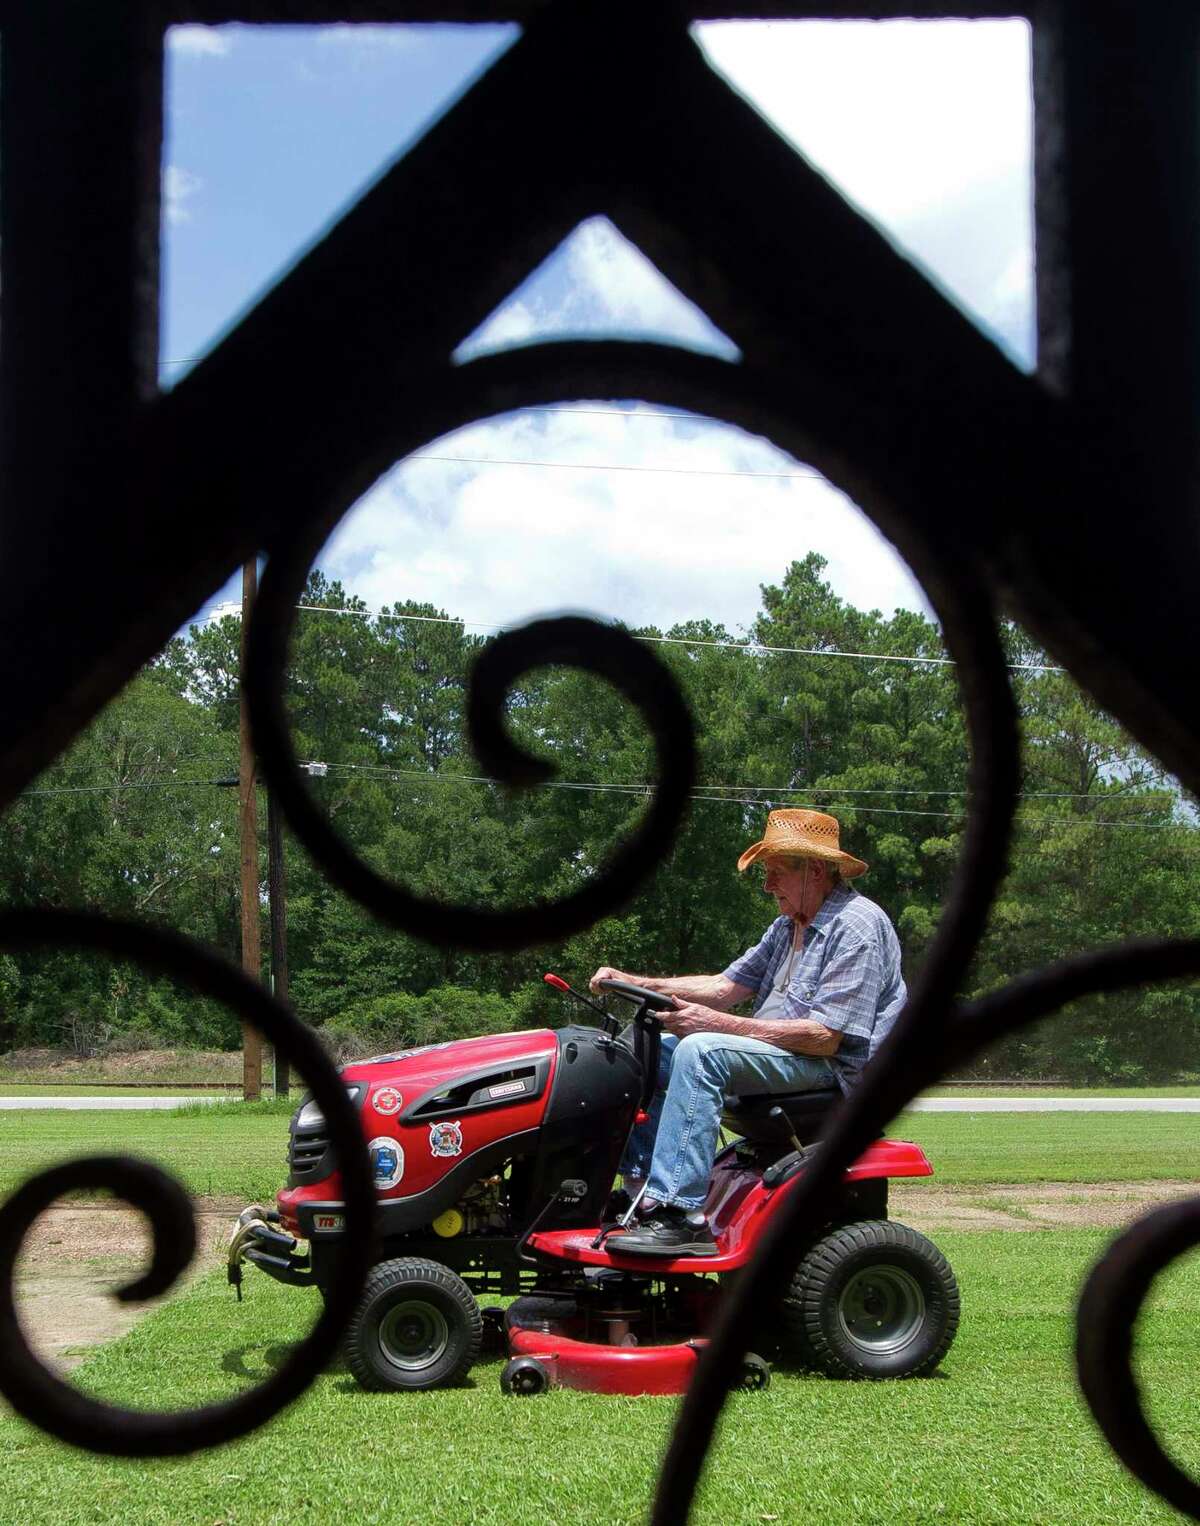 Herbert Freeman cuts the grass on his family's property on South Frazier Street, Thursday, June 29, 2017, in Conroe. The 88-year-old Korean War veteran still lives on the property that includes his childhood home his parents built in 1933. "I've been whooped twice (growing up) on this property," Freeman said laughing as he wiped sweat off his face. "I guess I still am."